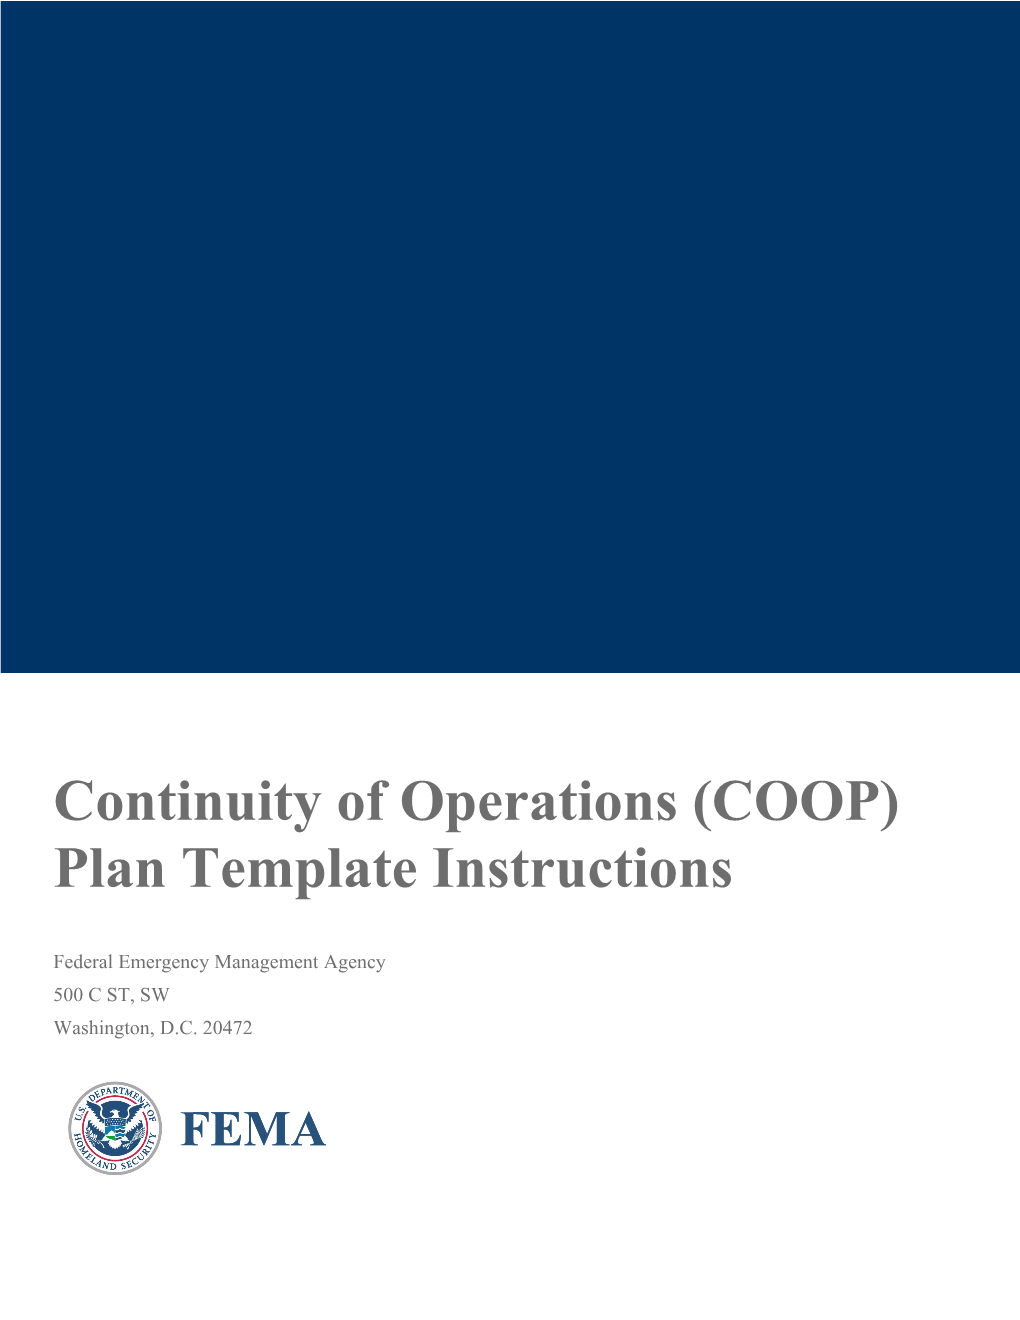 Continuity of Operations (COOP) Plan Template Instructions